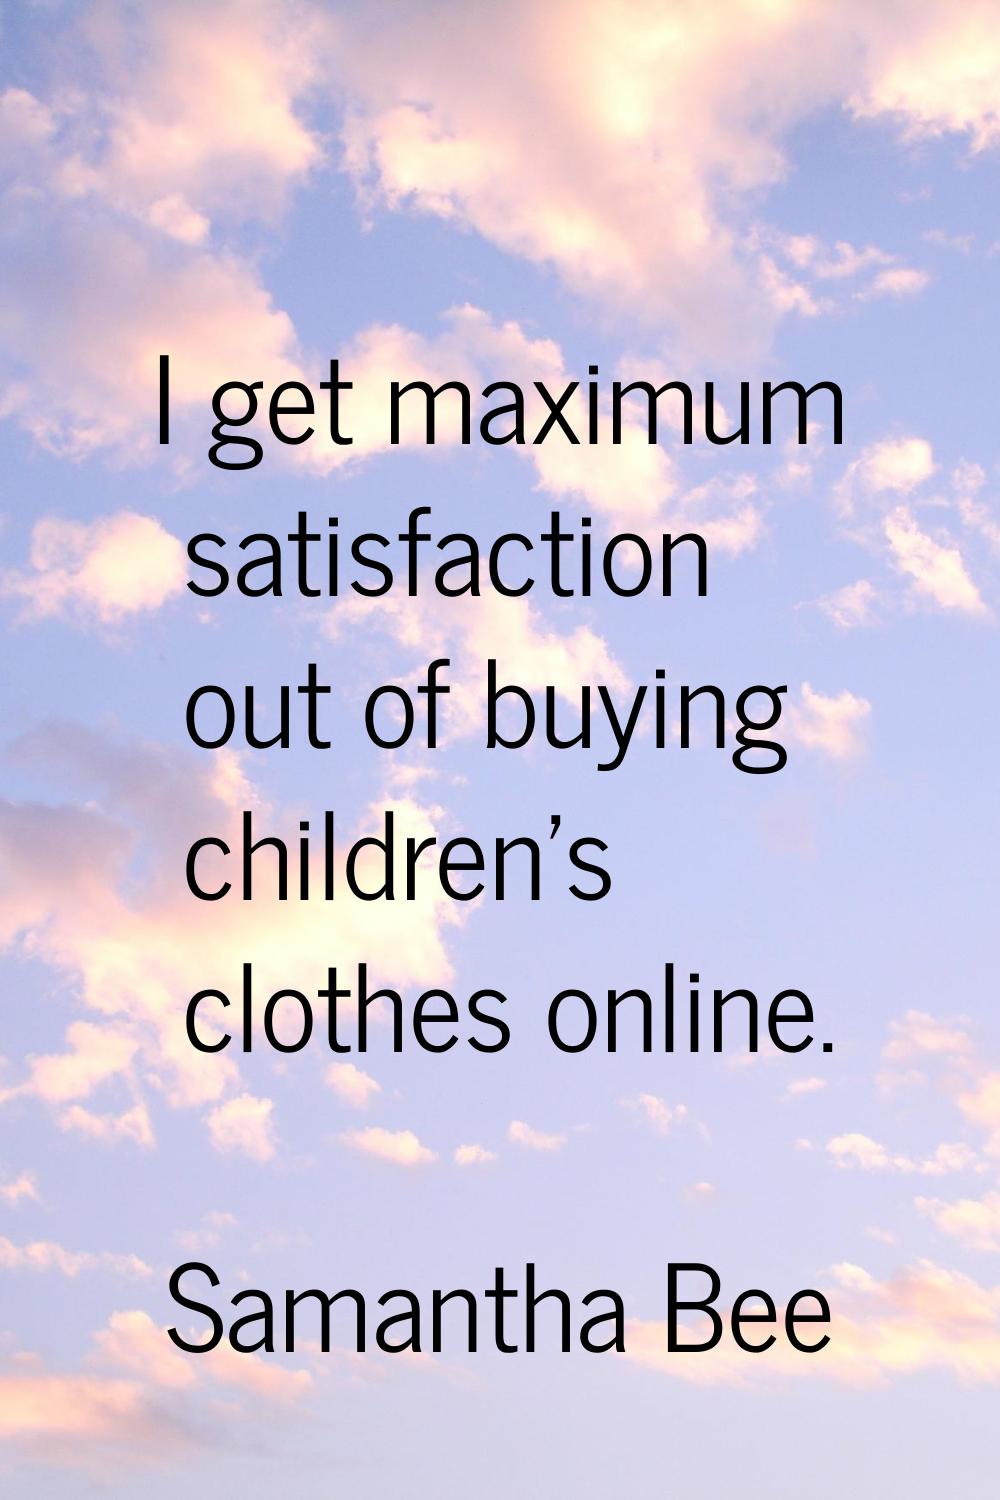 I get maximum satisfaction out of buying children's clothes online.